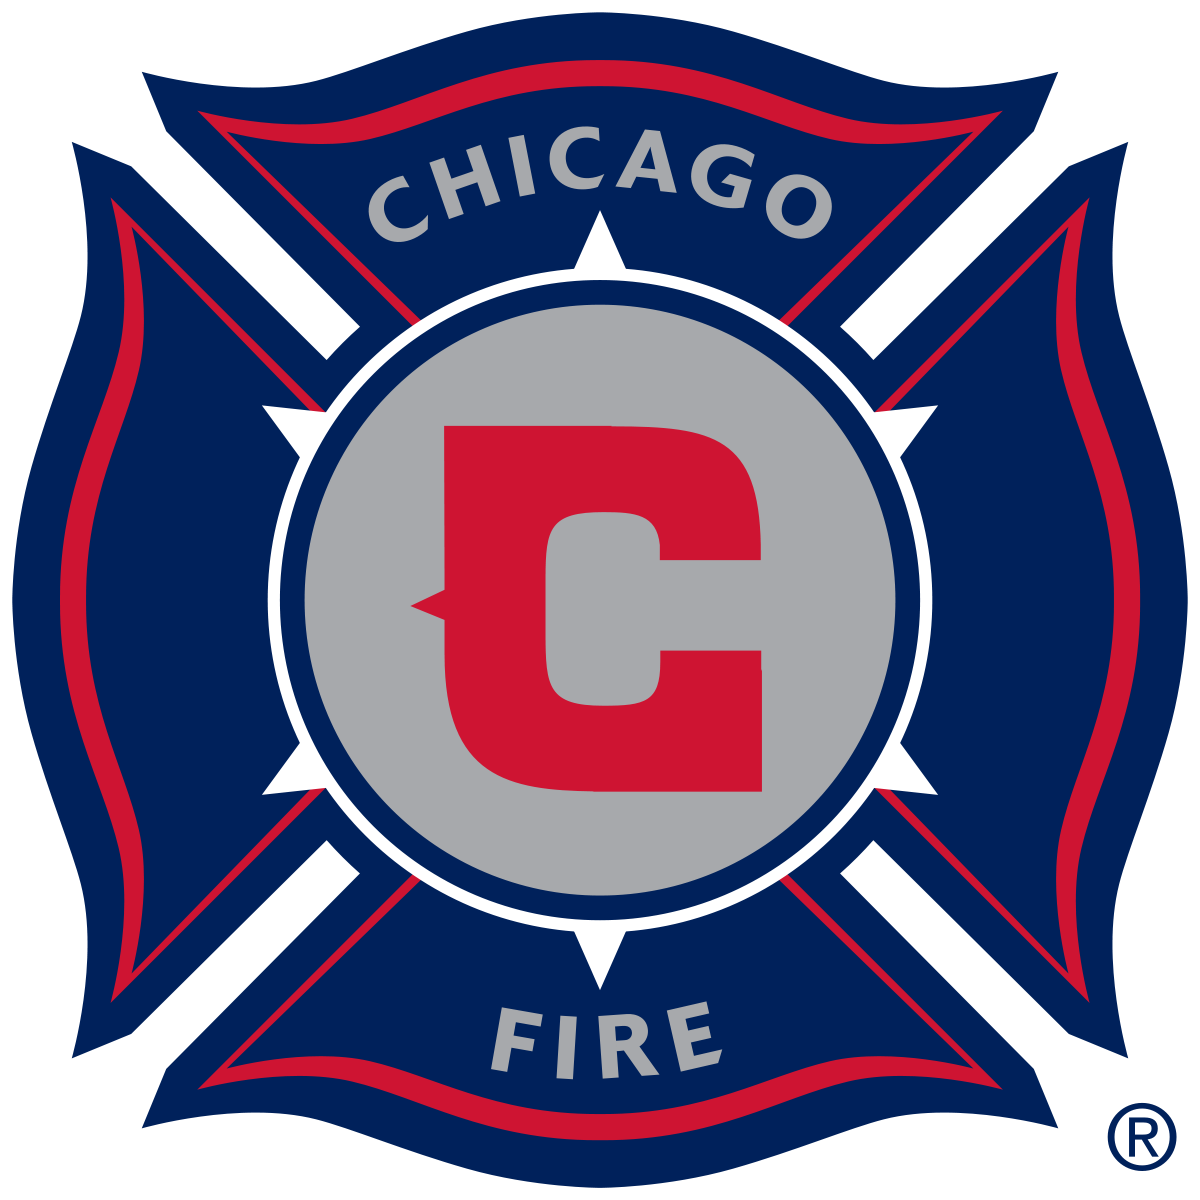 Chicago Fire Logo Png Hdpng.com 1200 - Chicago Fire, Transparent background PNG HD thumbnail